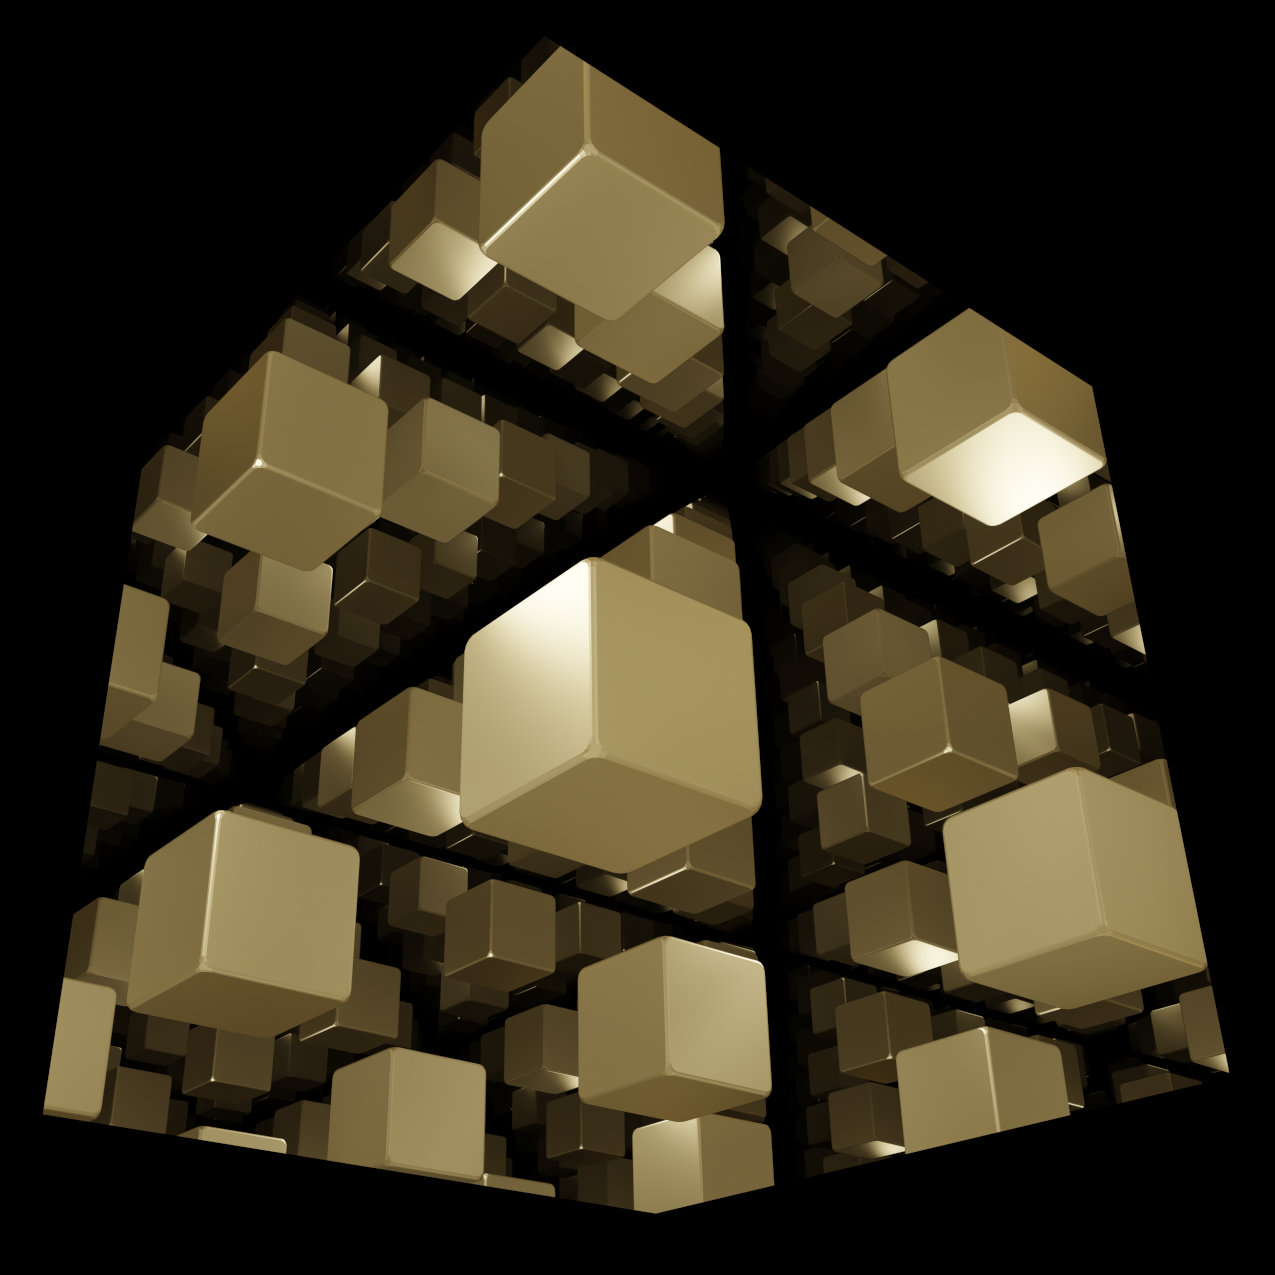 Virtual abstract scenery, Scenic abstract digital contemporary art, Raytracing, Computer-rendered image, 2022. Fine Art Print 50 x 50cm on photographic paper, mounted on Alu-Dibond®. Limited Edition 1/1. A golden cube appears in many reflected images in three spatial directions.